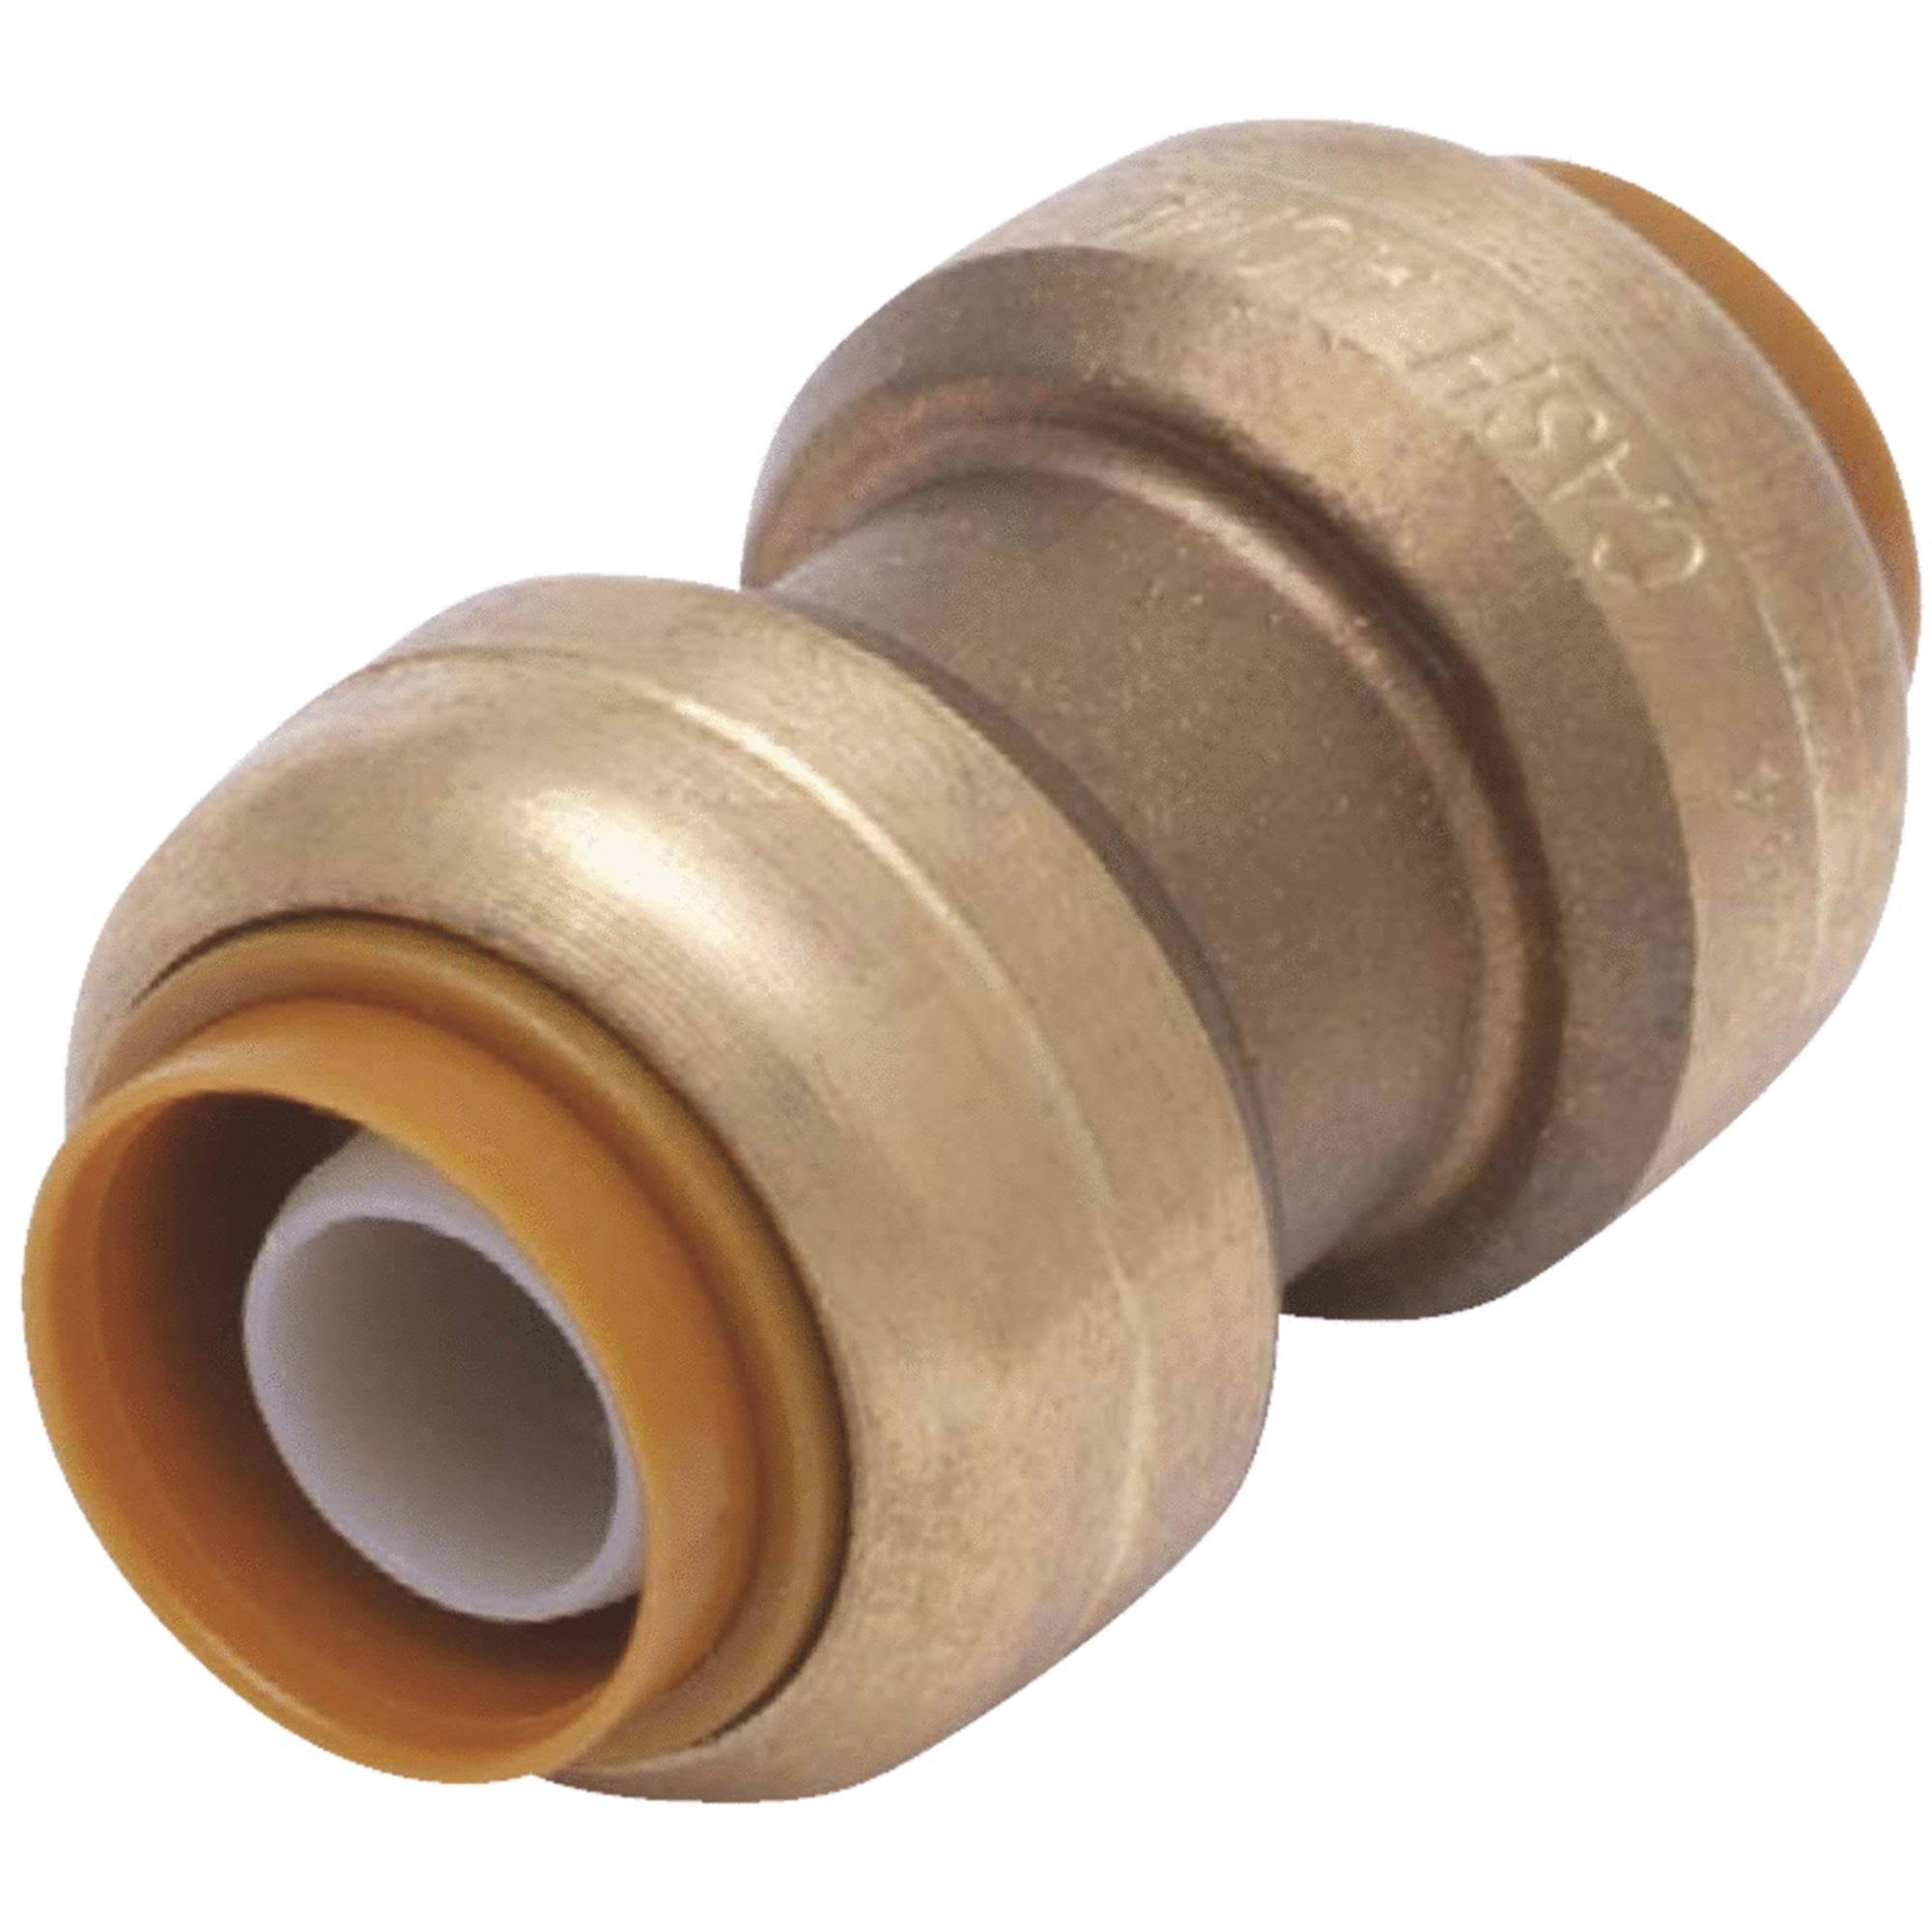 SharkBite Brass Push-To-Connect Coupling - 1 in